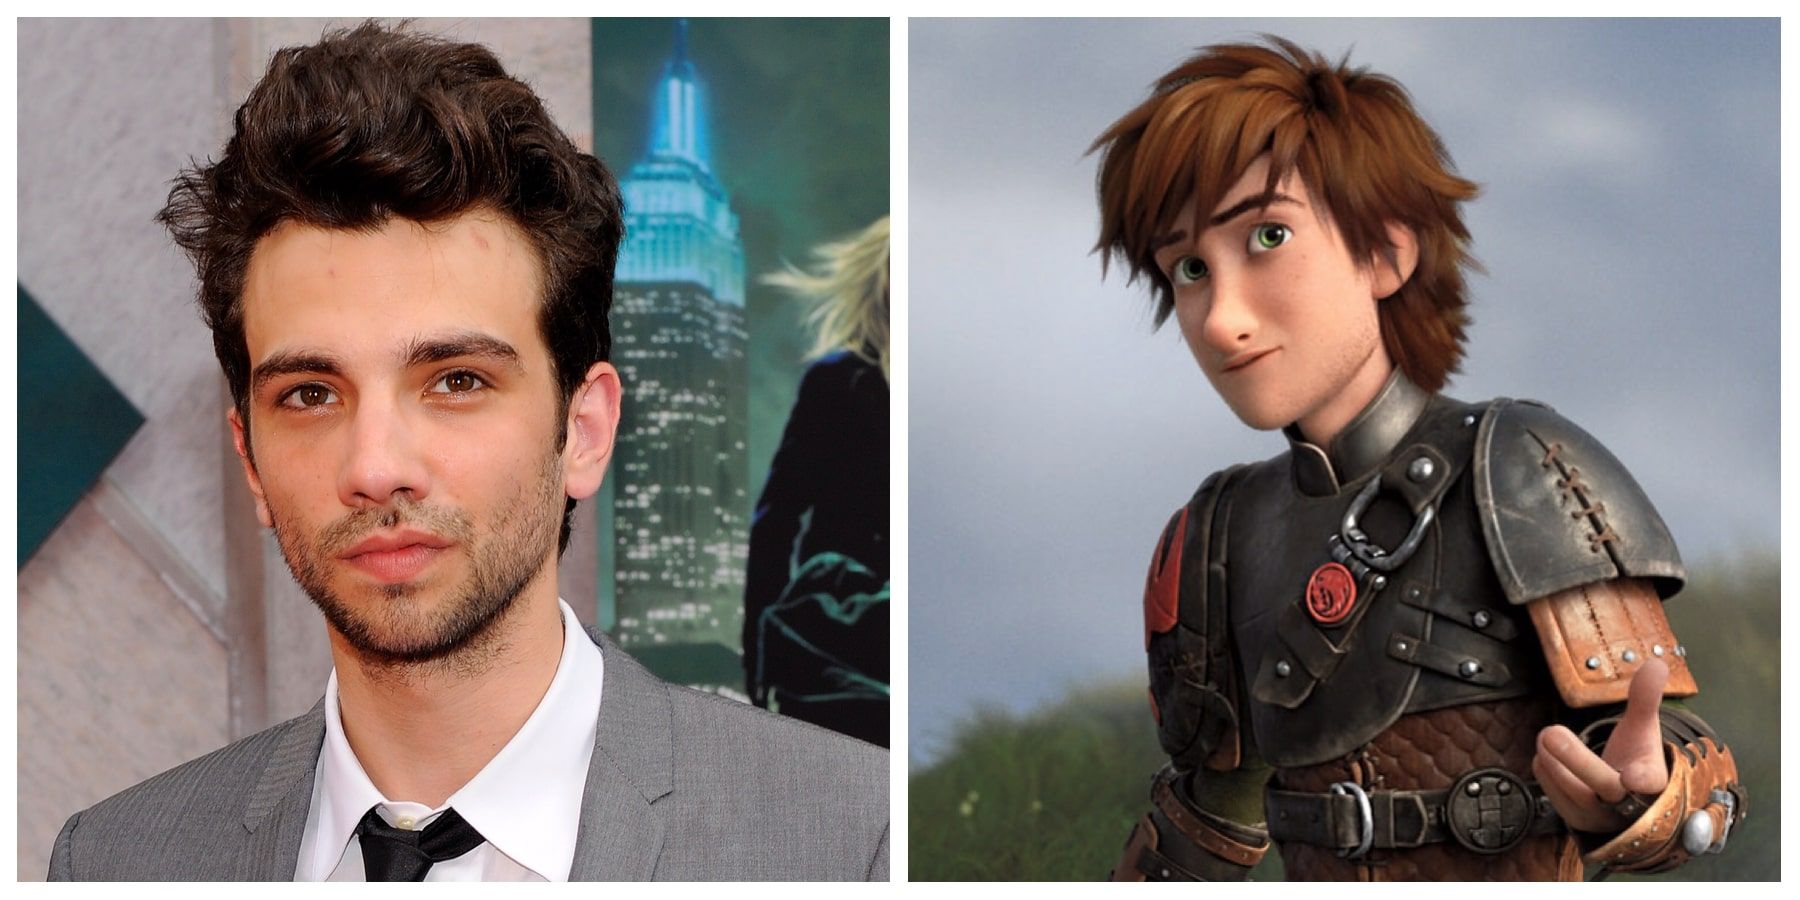 Jay Baruchel as Hiccup in How to Train Your Dragon 2